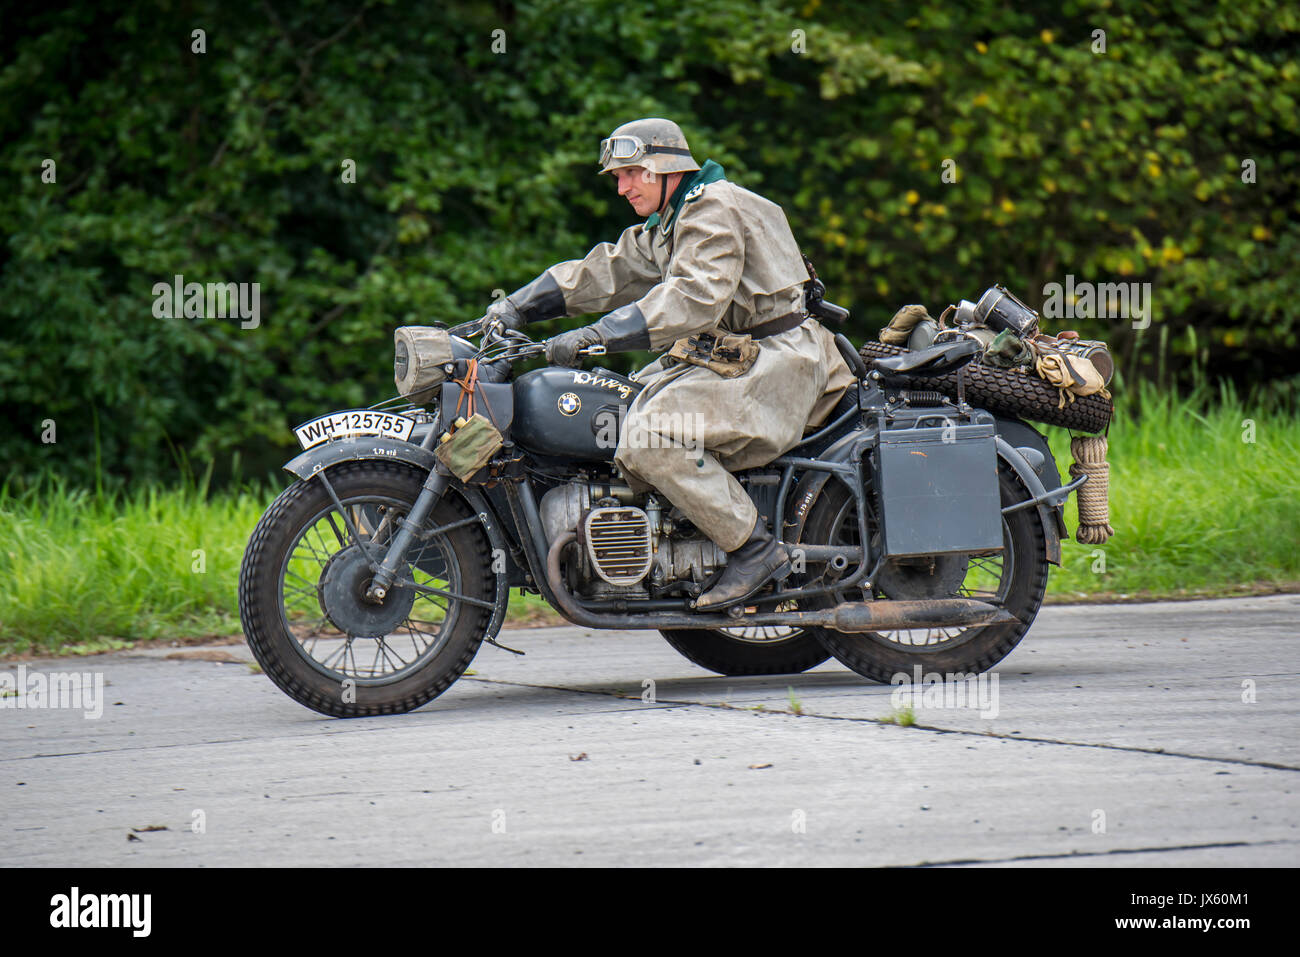 Spectacular Gallery Of ww2 motorcycle german Photos - Antique motorcycle